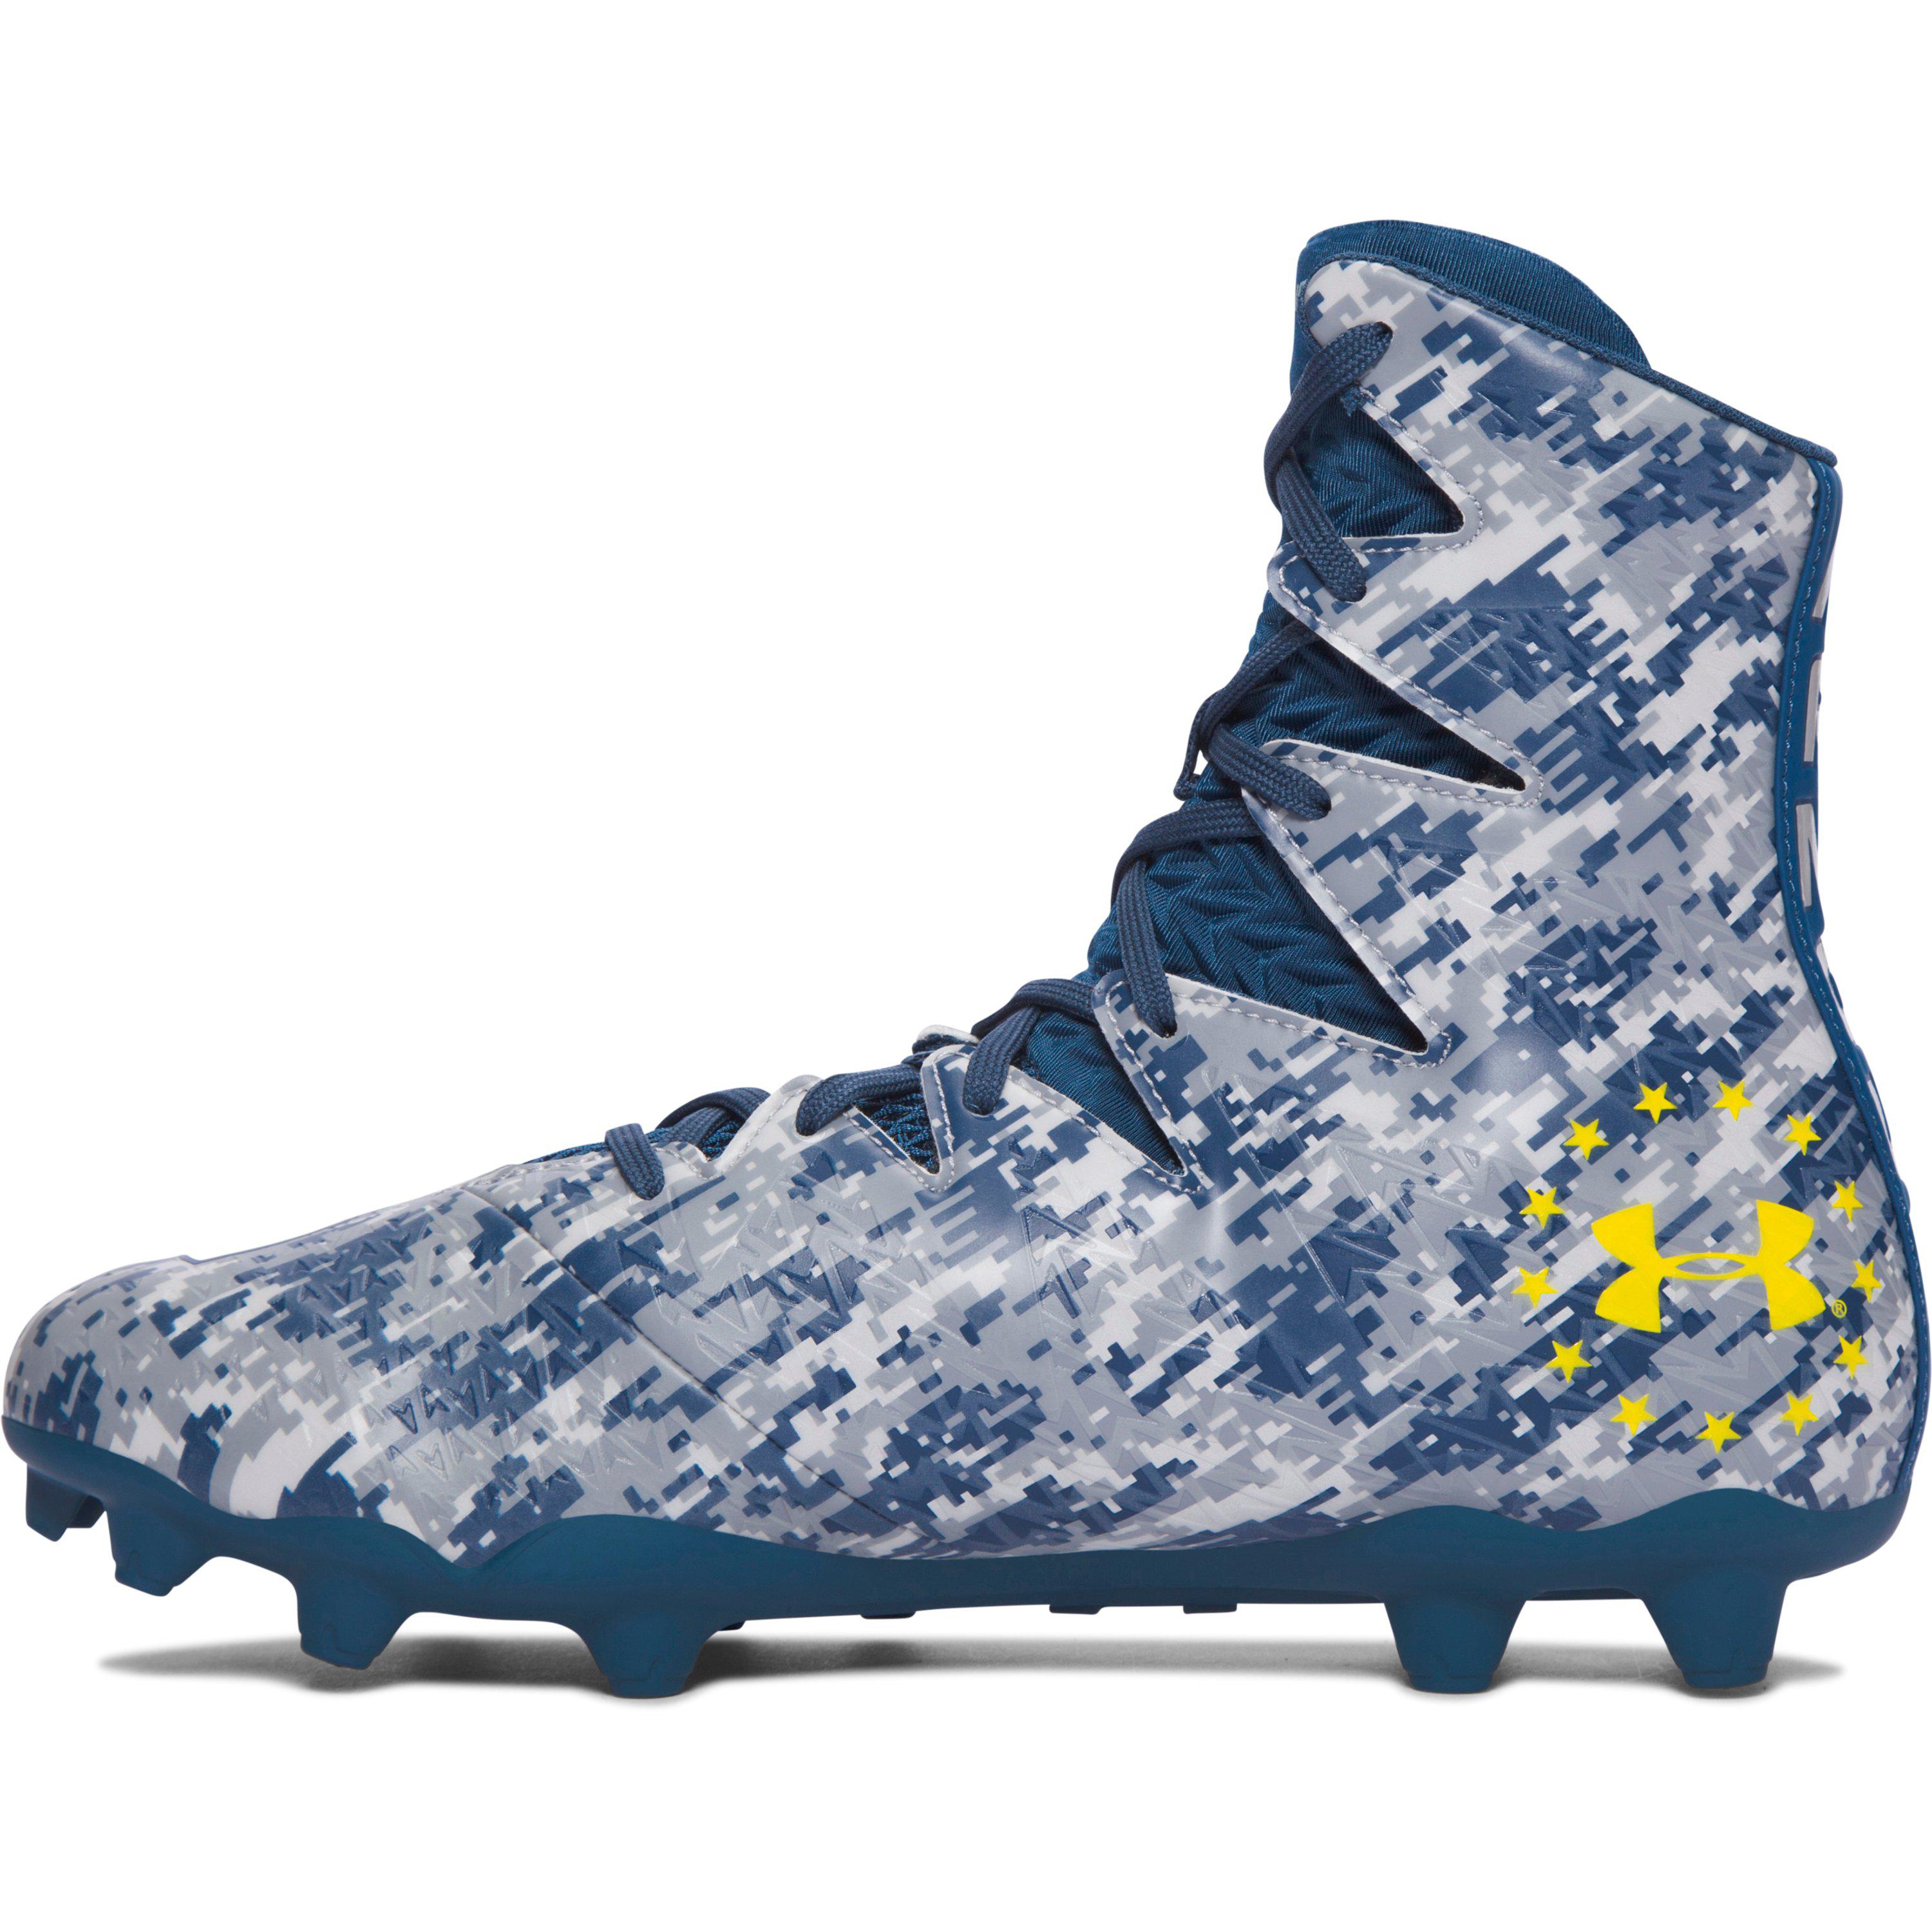 Under Armour Highlight MC Navy Football Cleats Honor Courage 1289771-437 Size 12 for sale online 